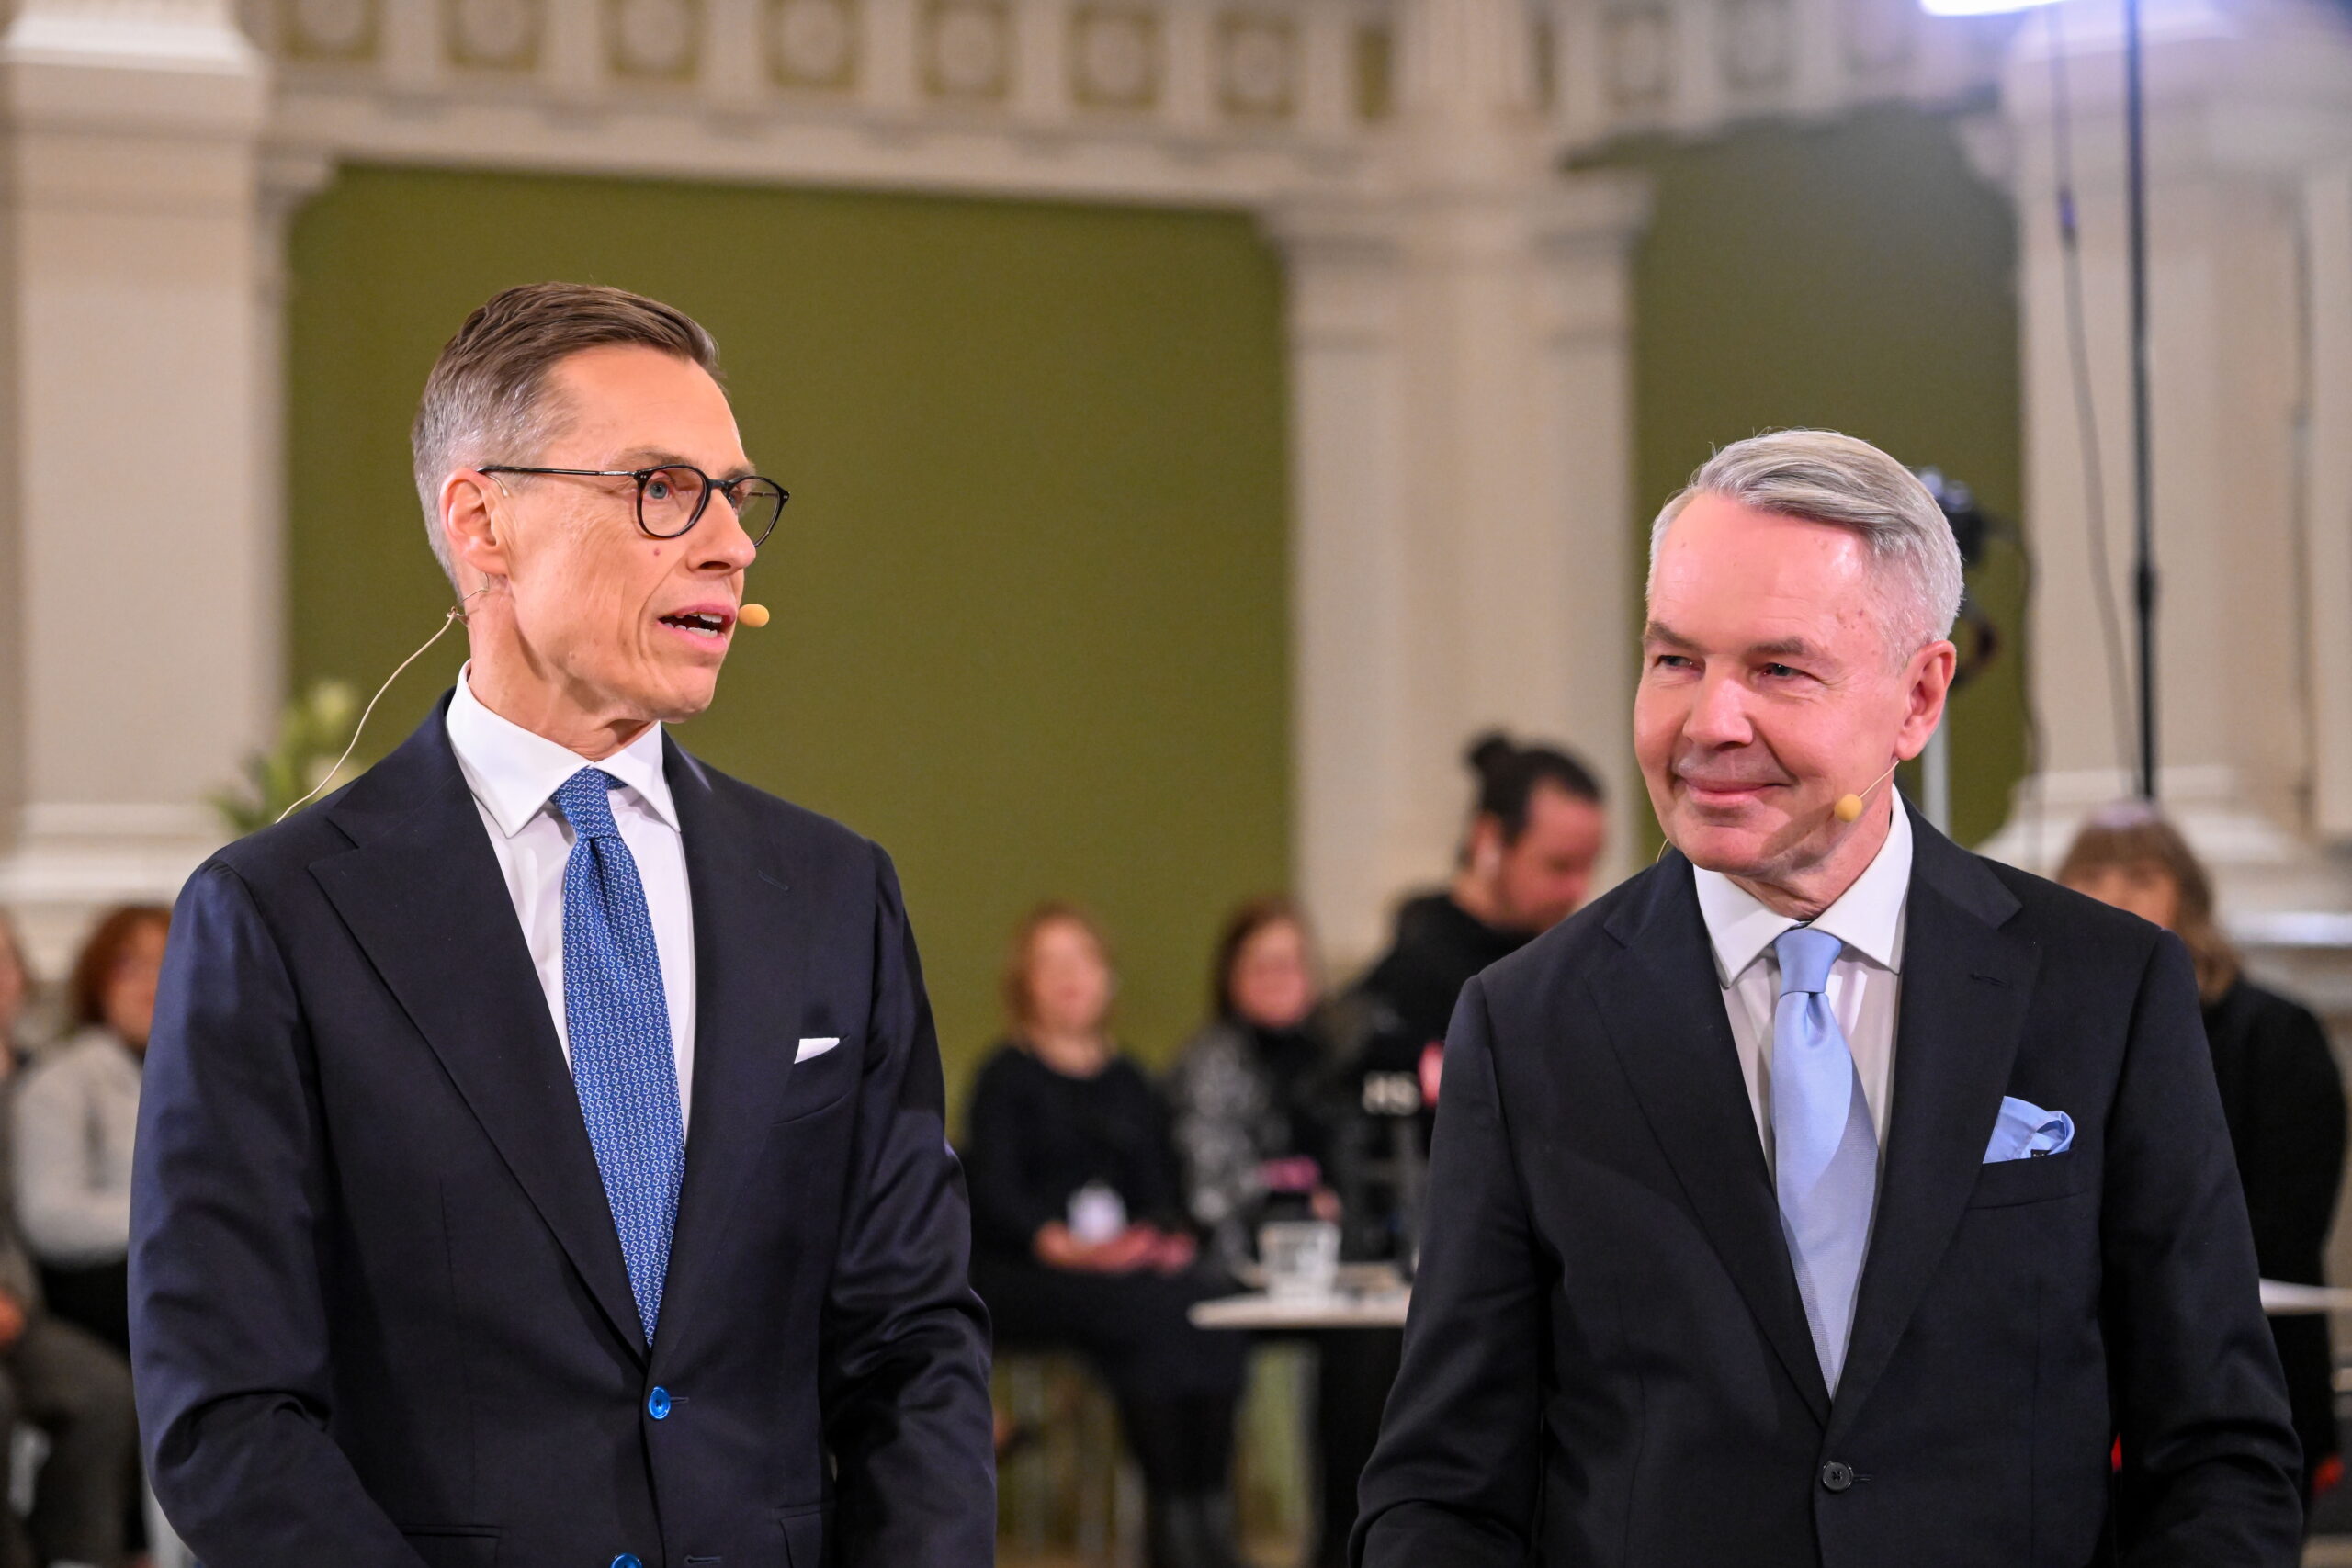 epa11145853 Presidential candidates Alexander Stubb (L) and Pekka Haavisto (R) during the second round of the presidential election at the Helsinki City Hall, in Helsinki, Finland 11 February 2024. The second round of the presidential election in Finland takes place on 11 February 2024 between the two frontrunner candidates of the first round Alexander Stubb and Pekka Haavisto.  EPA/KIMMO BRANDT